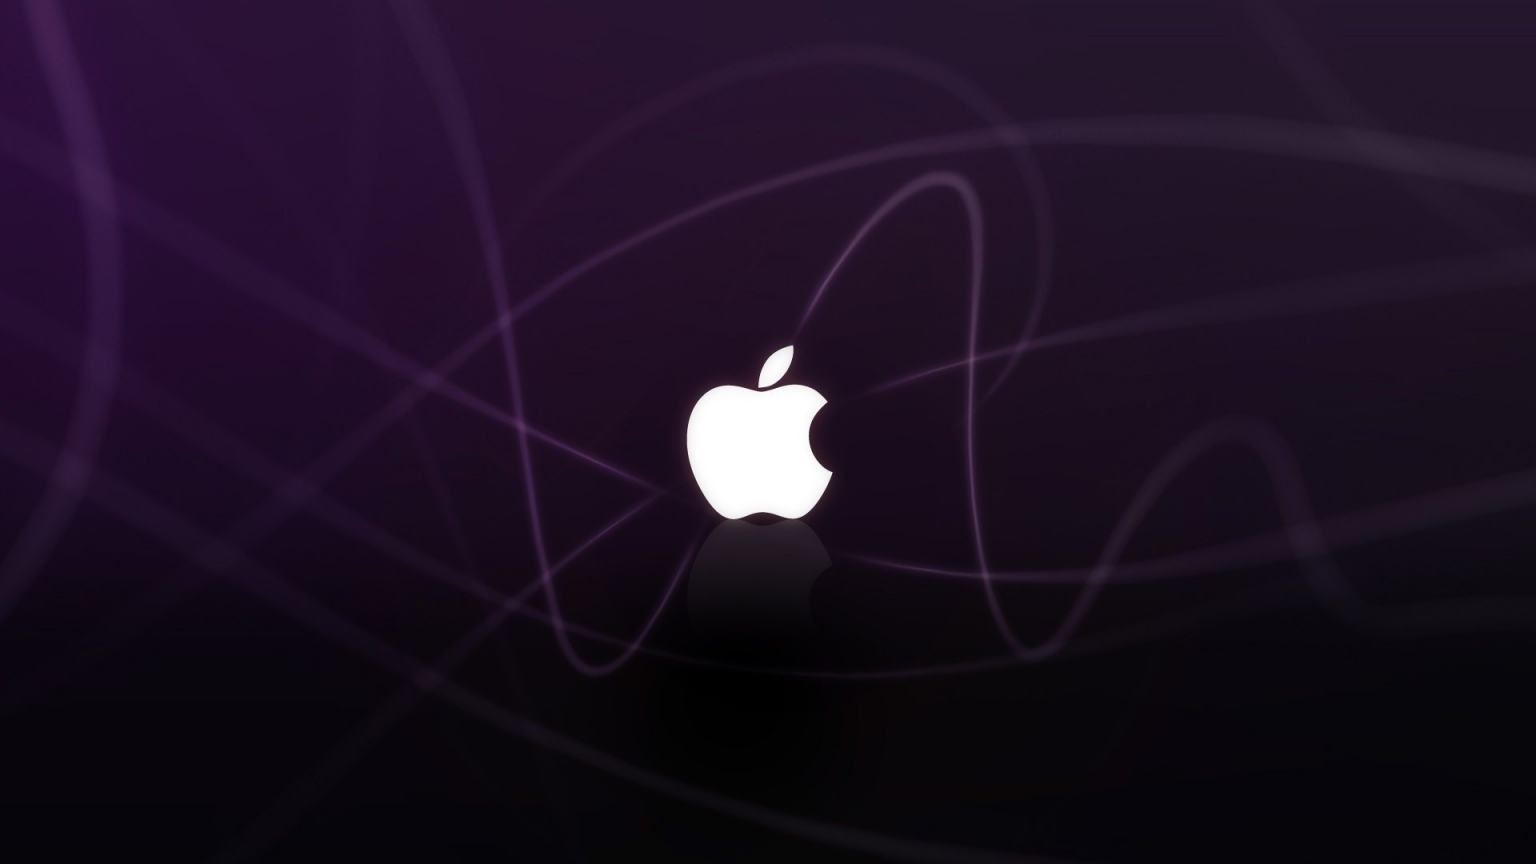 Purple Apple frequency for 1536 x 864 HDTV resolution